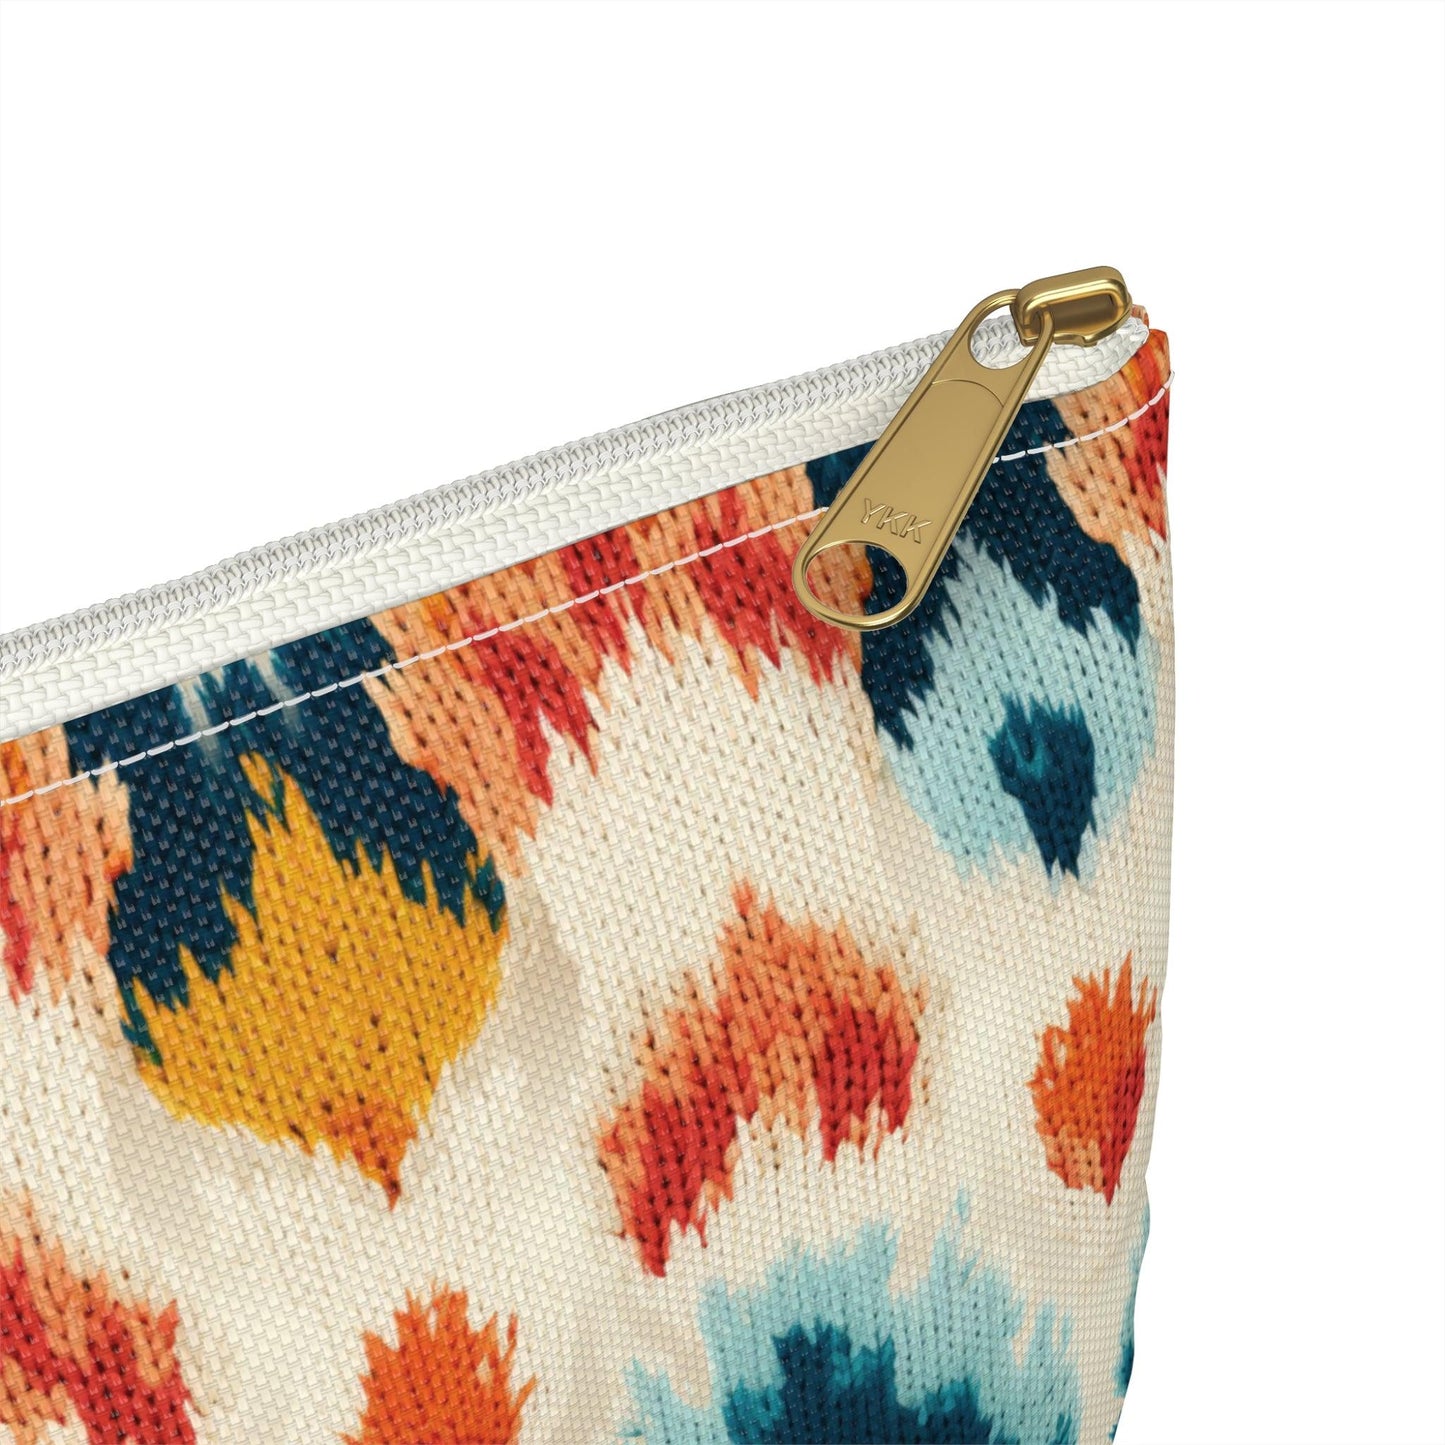 Indonesian Ikat Pouch - The Global Wanderer